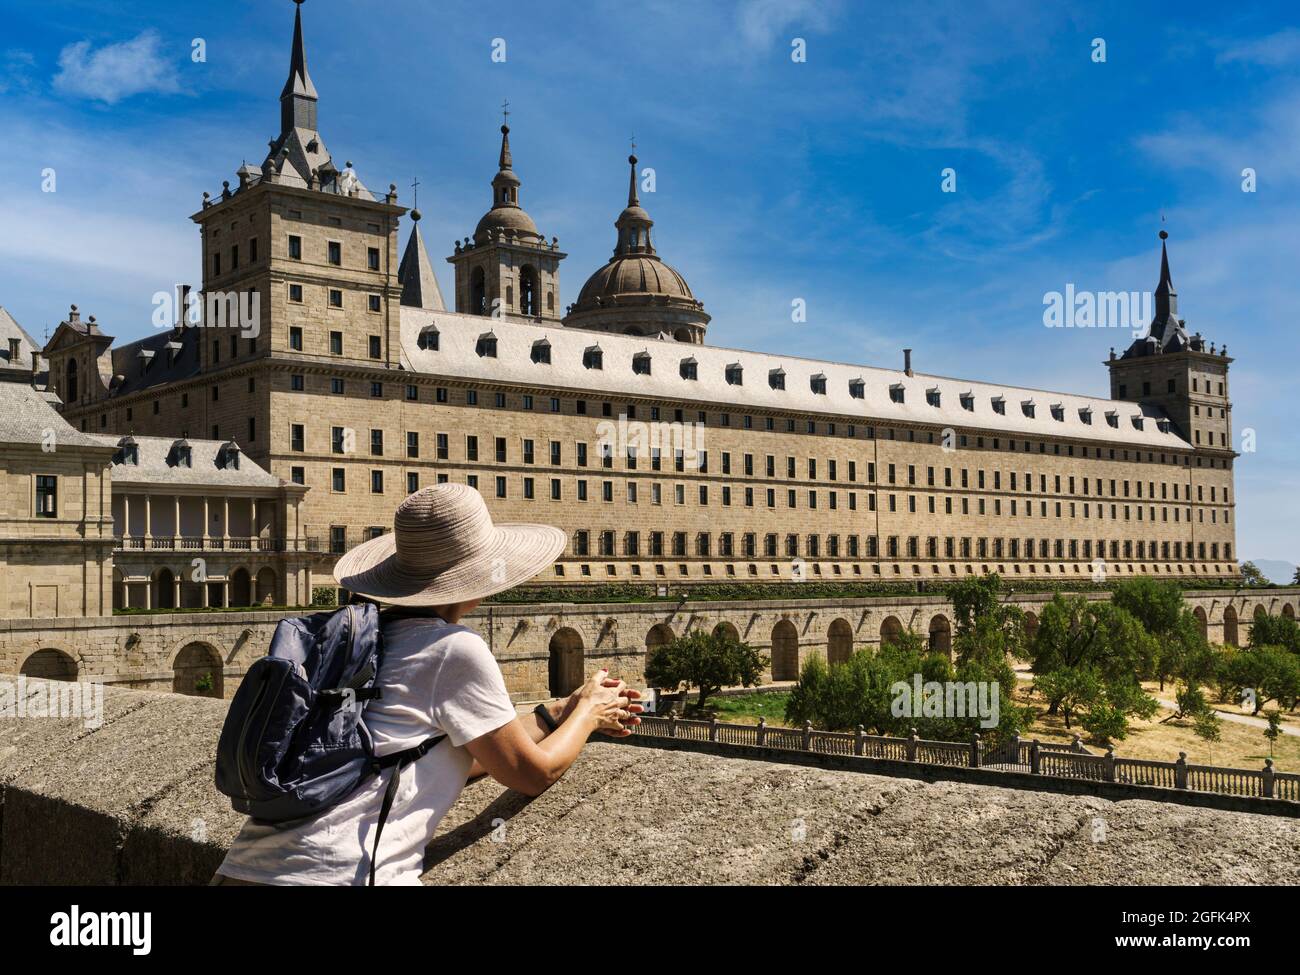 Mature woman with hat and small backpack contemplating the monument of the monastery of San Lorenzo de El Escorial, in summer and with blue sky and li Stock Photo